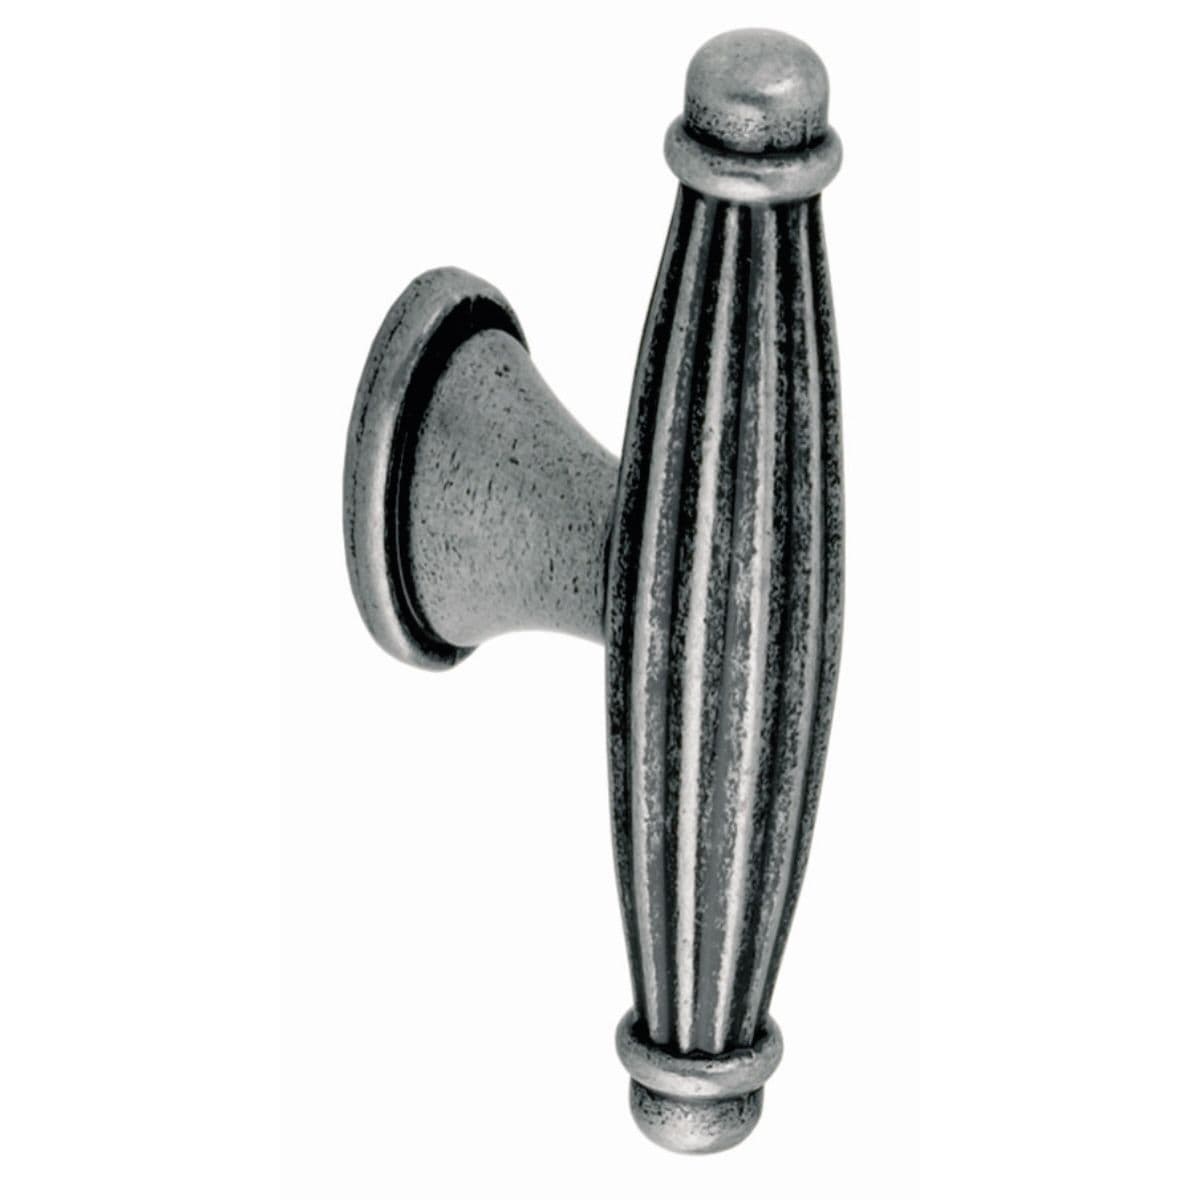 LEASOWES REEDED T KNOB Cupboard Handle - 70mm long - ANTIQUE PEWTER EFFECT finish (PWS 2432AP)